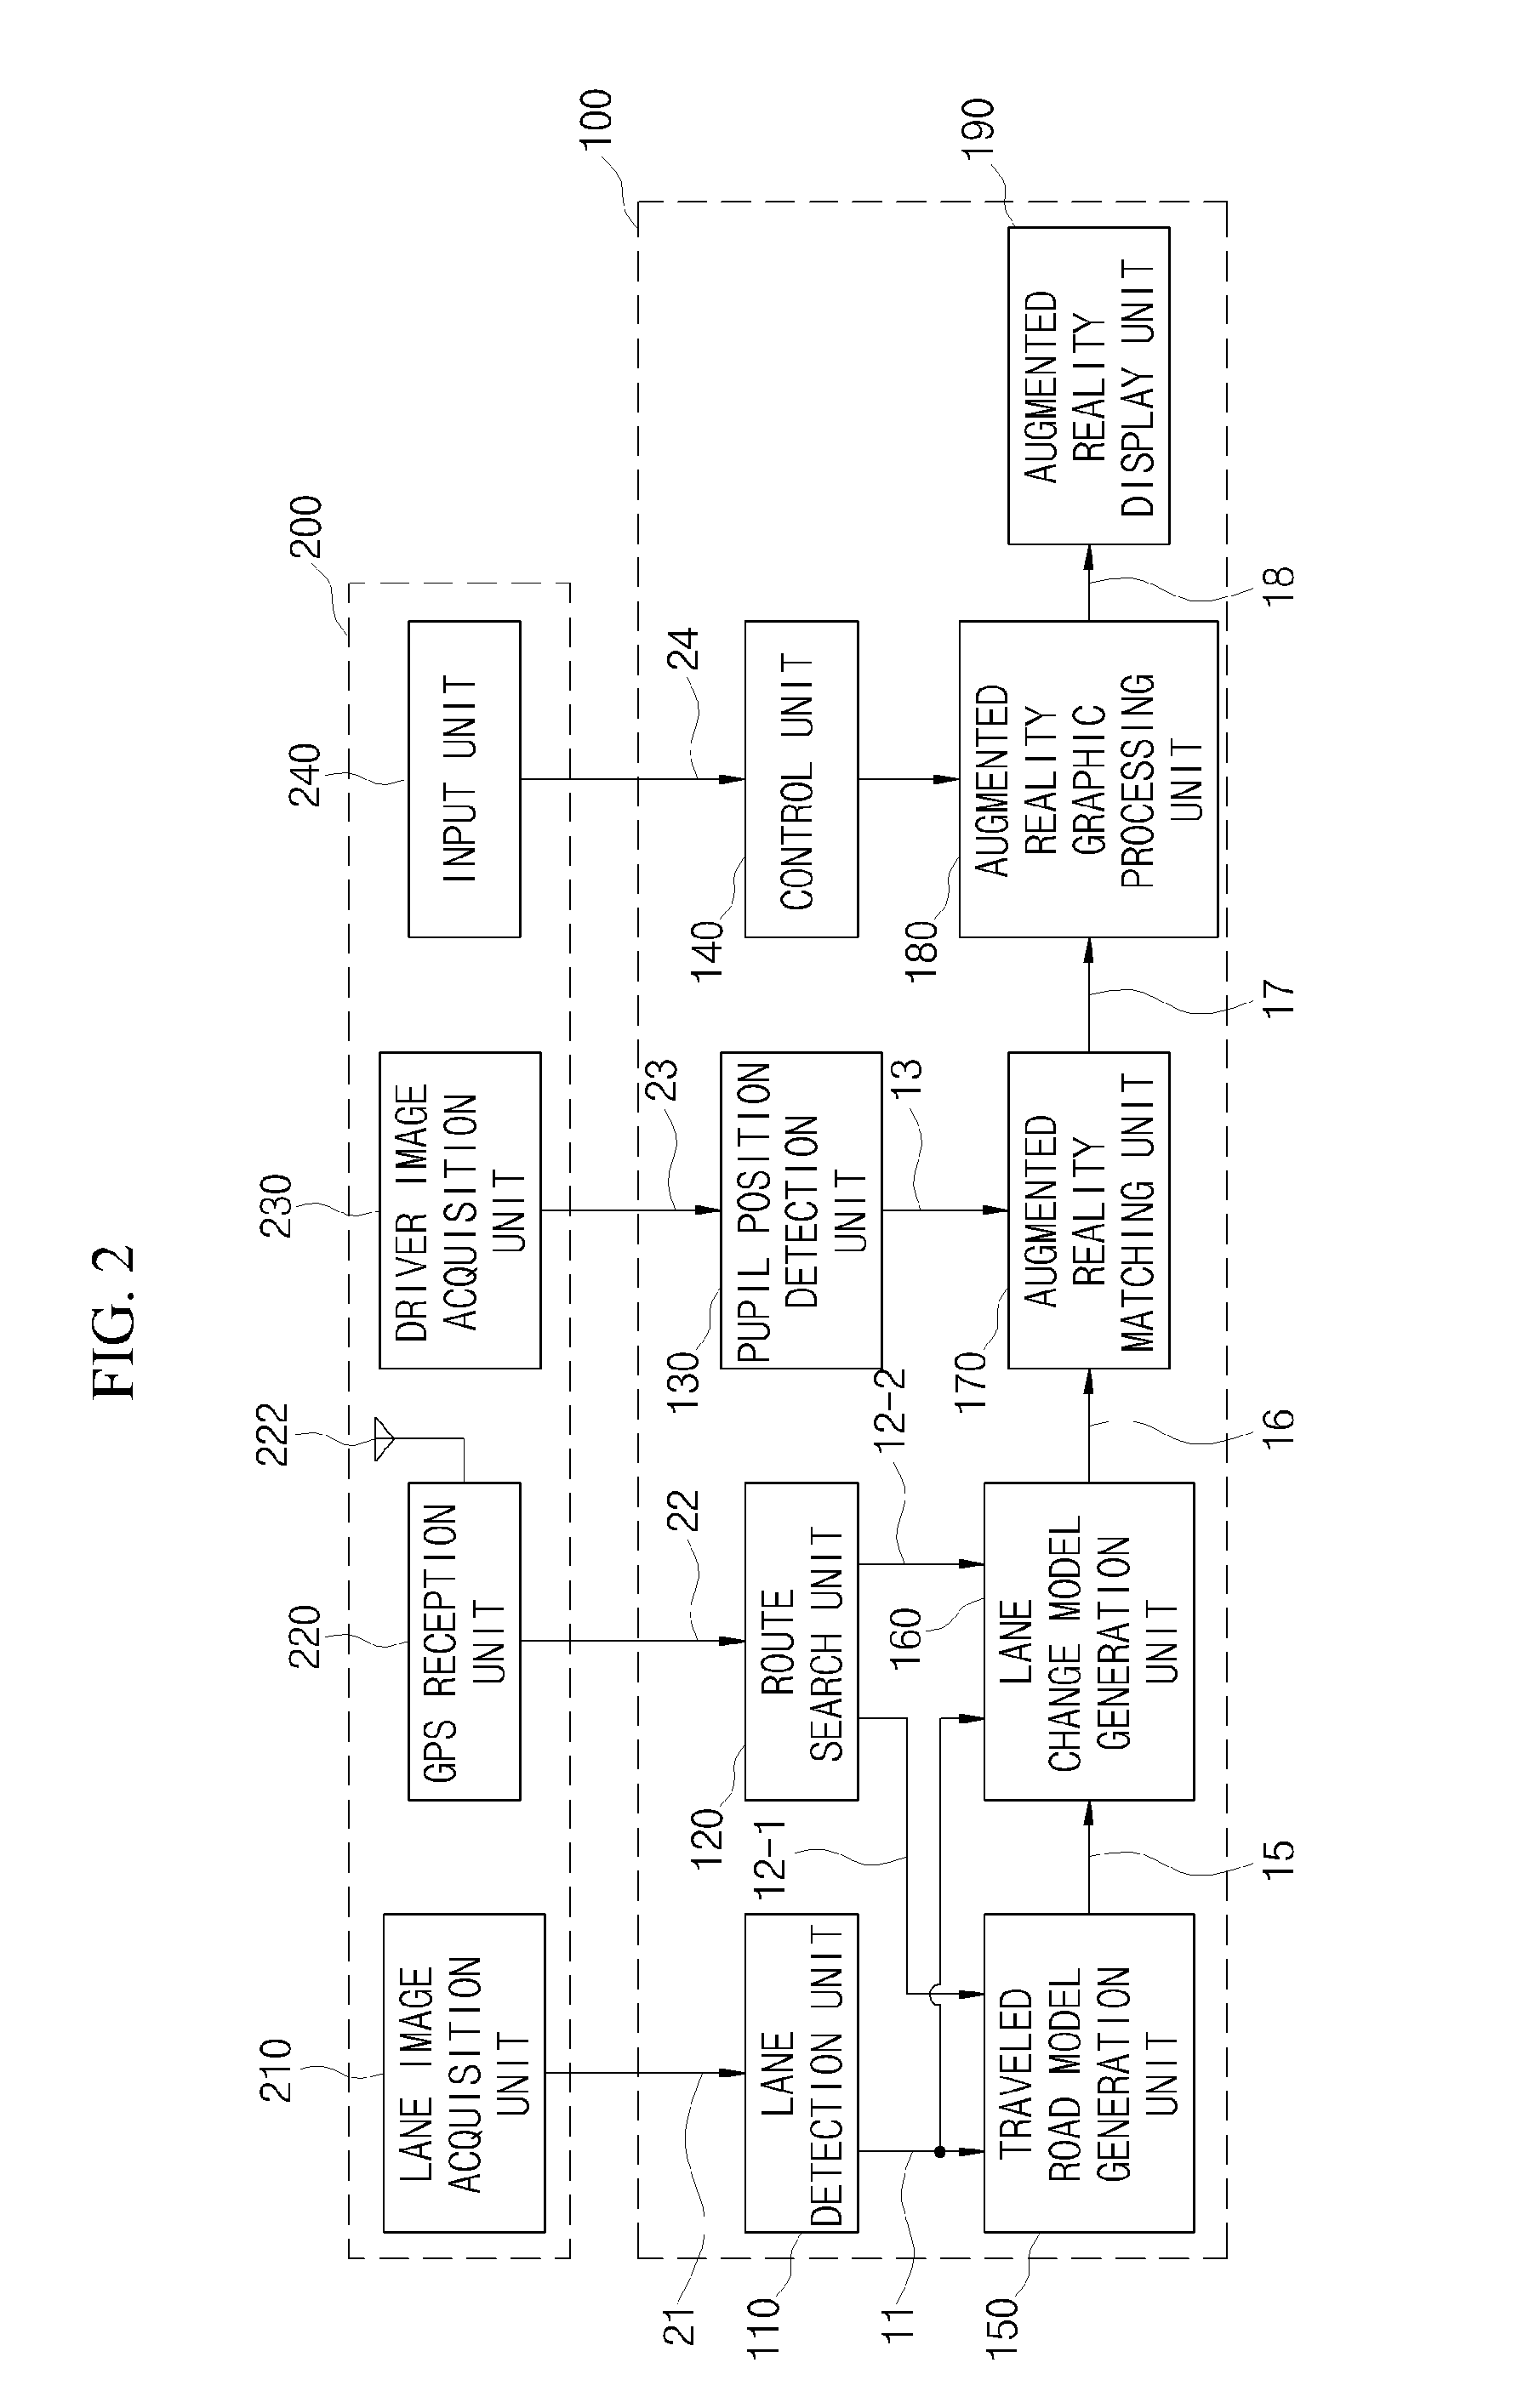 Apparatus and method of guiding lane change based on augmented reality